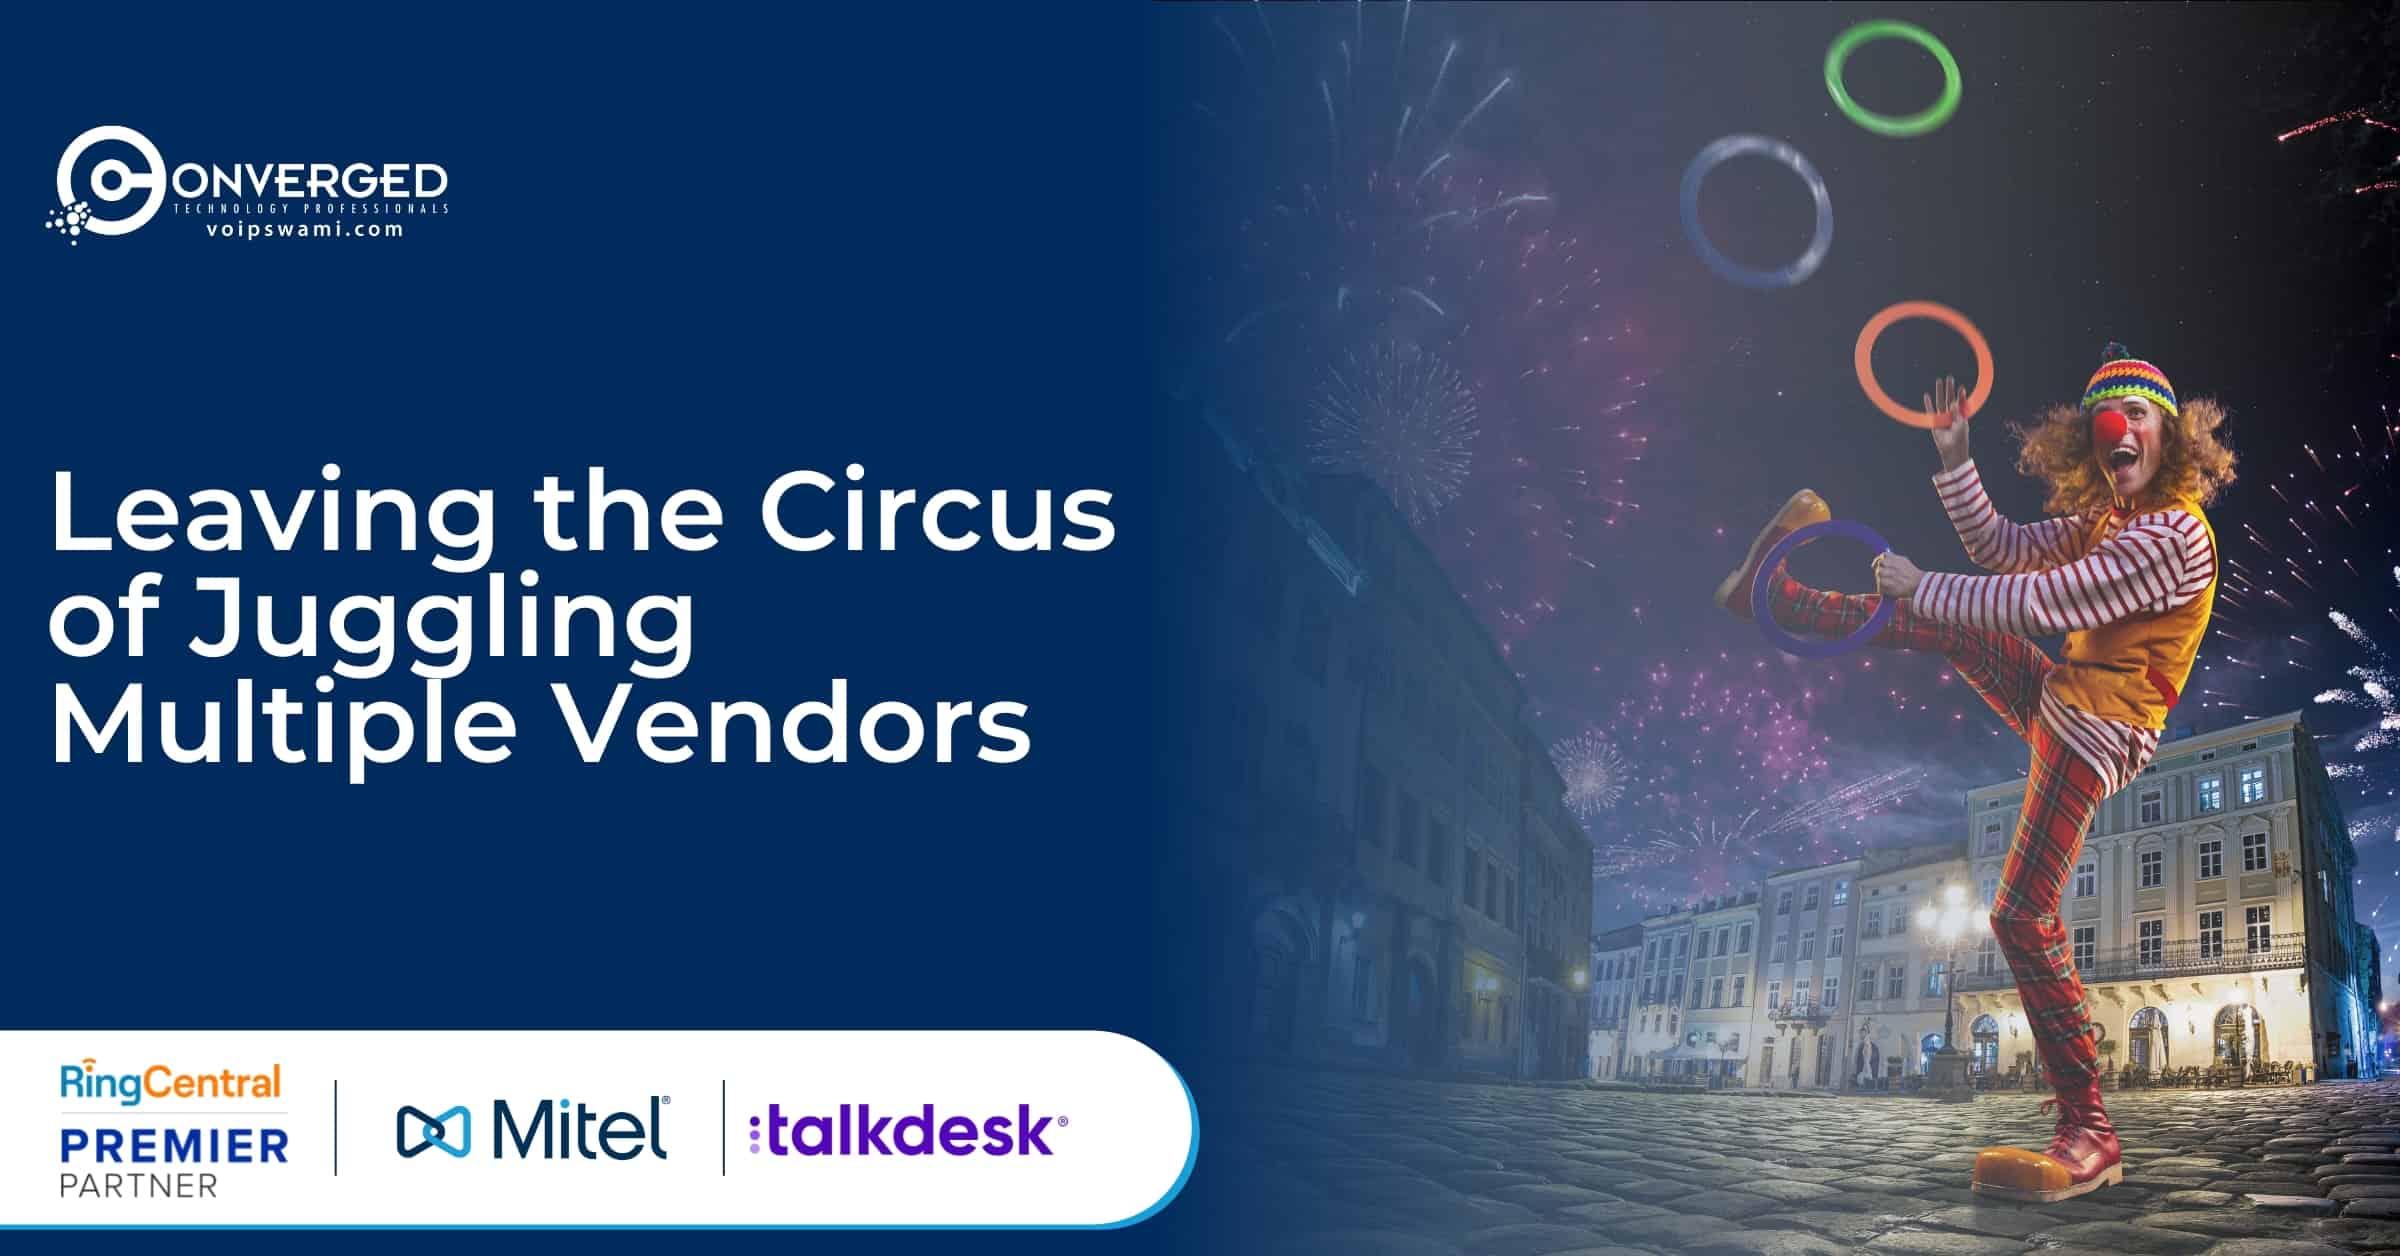 Leaving the Circus of Juggling Multiple Vendors